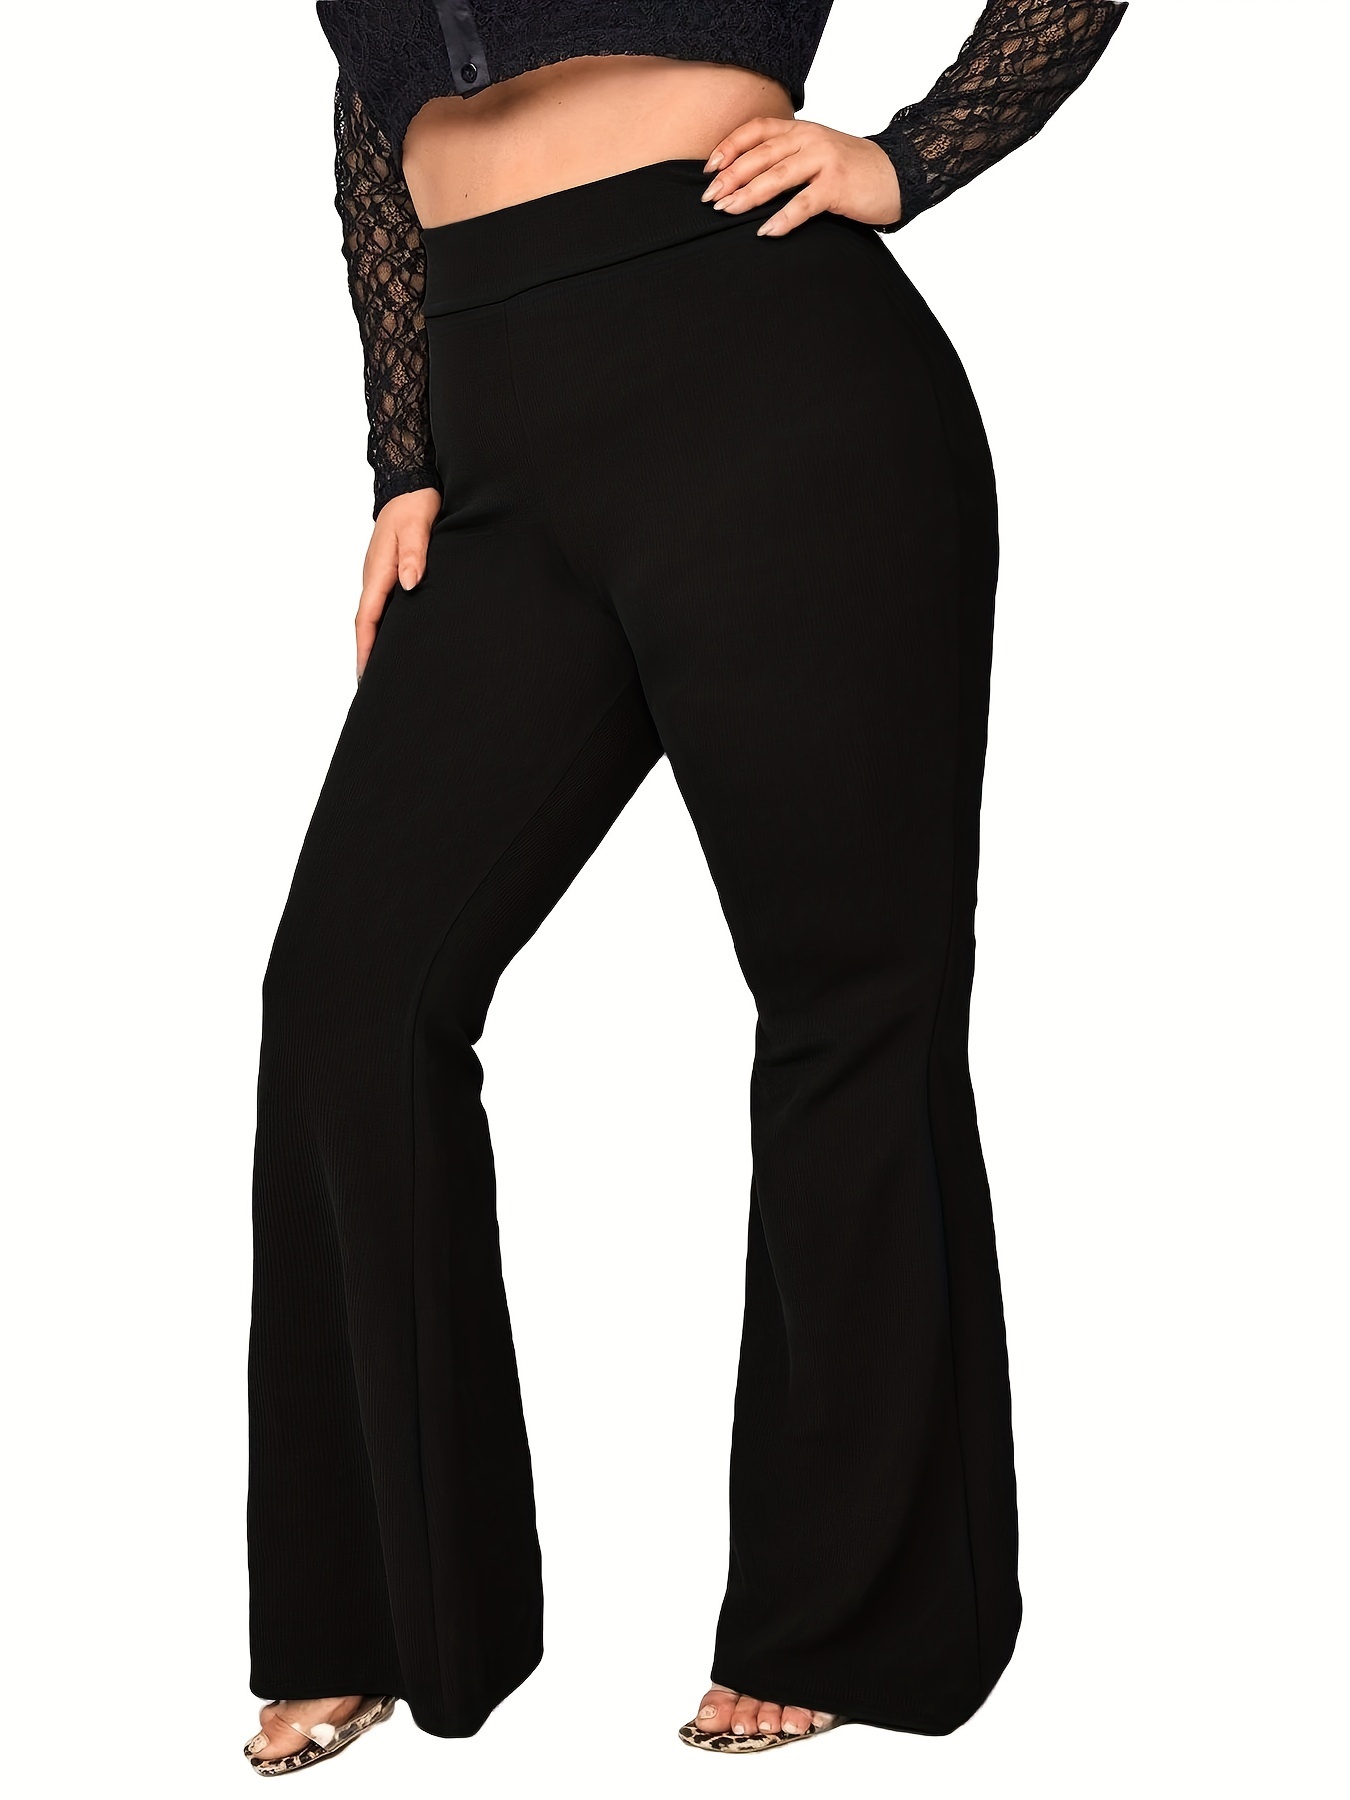 NEW LADIES PLUS SIZE FLARED WIDE LEG PARALLEL BOTTOM PANTS SUMMER TROUSERS 8-26